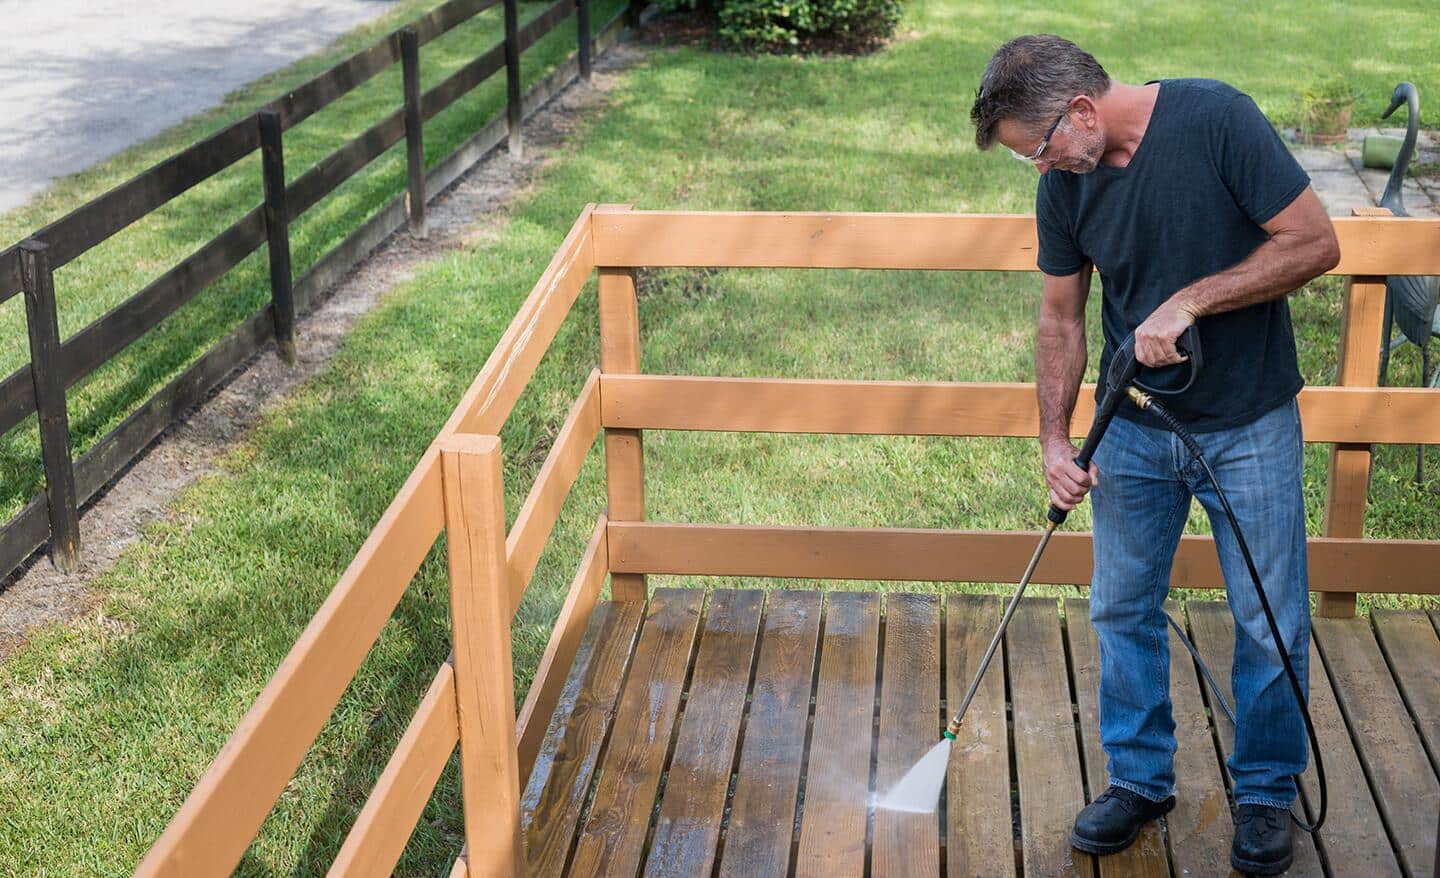 A man pressure washes his deck.